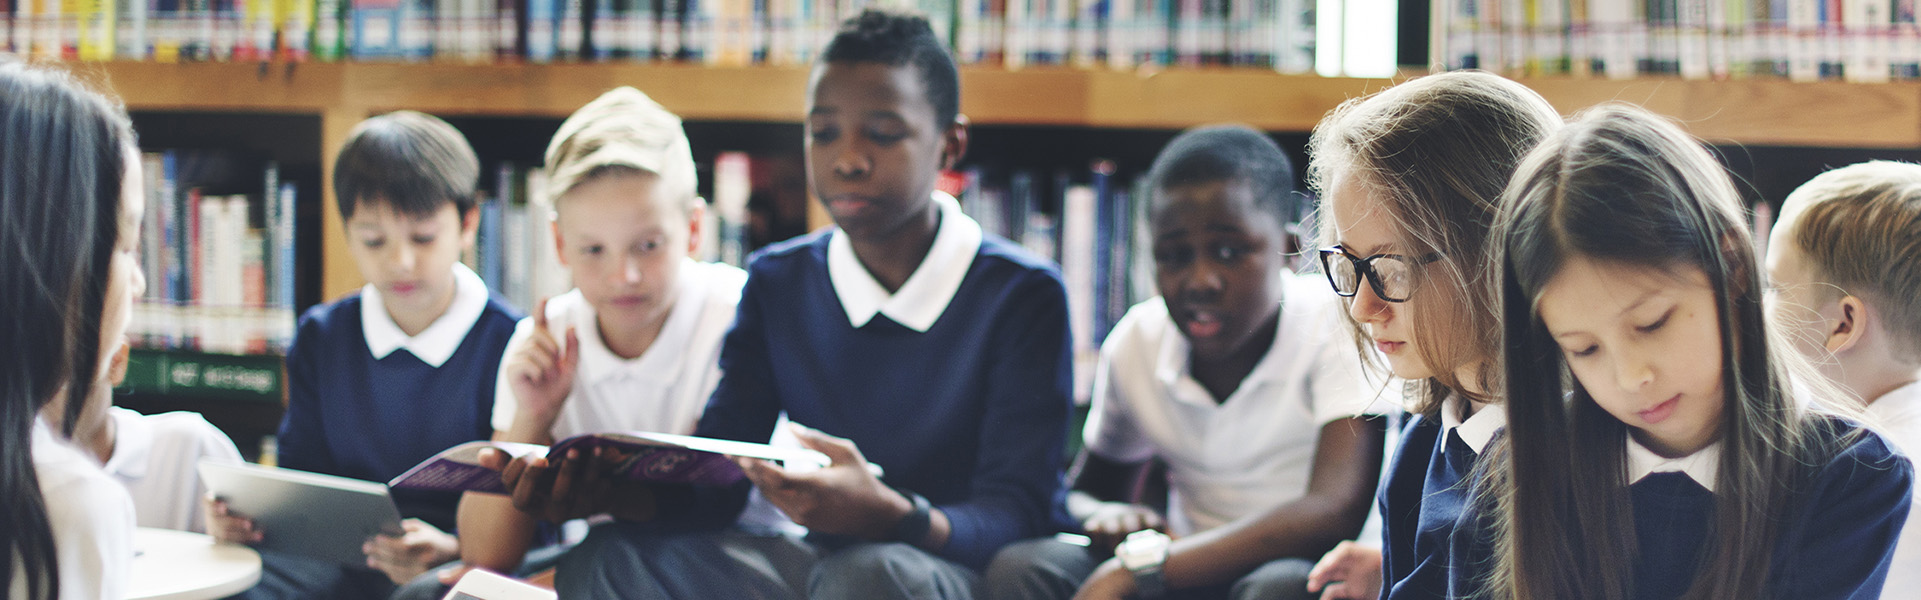 Browne Jacobson and the National Association of Head Teachers publish new guidance for faith schools faced with joining or becoming an academy trust